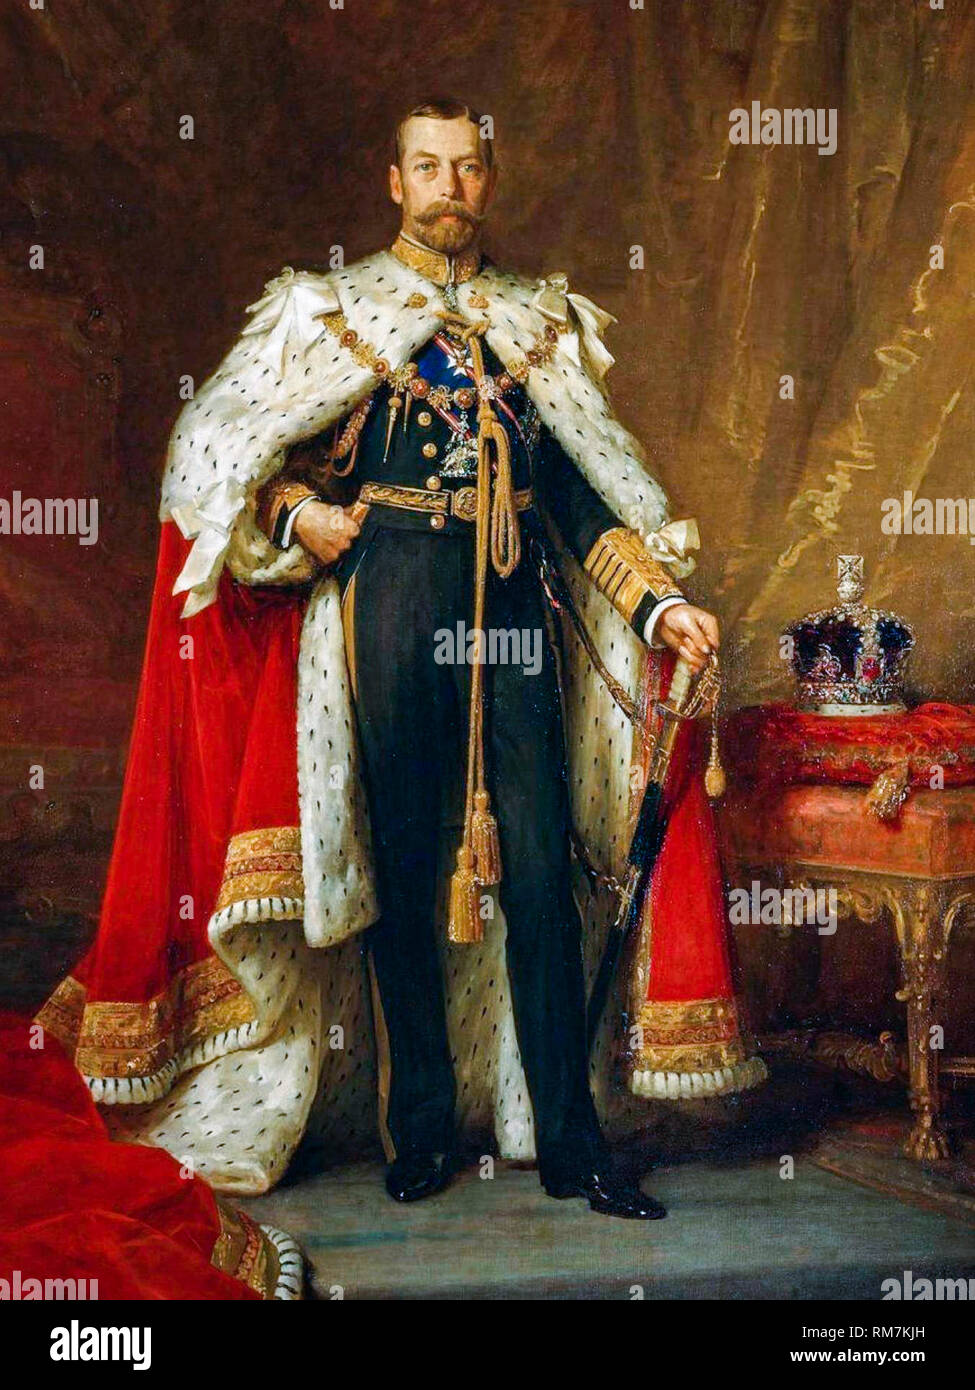 King George V of the United Kingdom (1865-1936), reign (1910-1936), in Coronation Robes, portrait painting by Sir Luke Fildes, circa 1911 Stock Photo